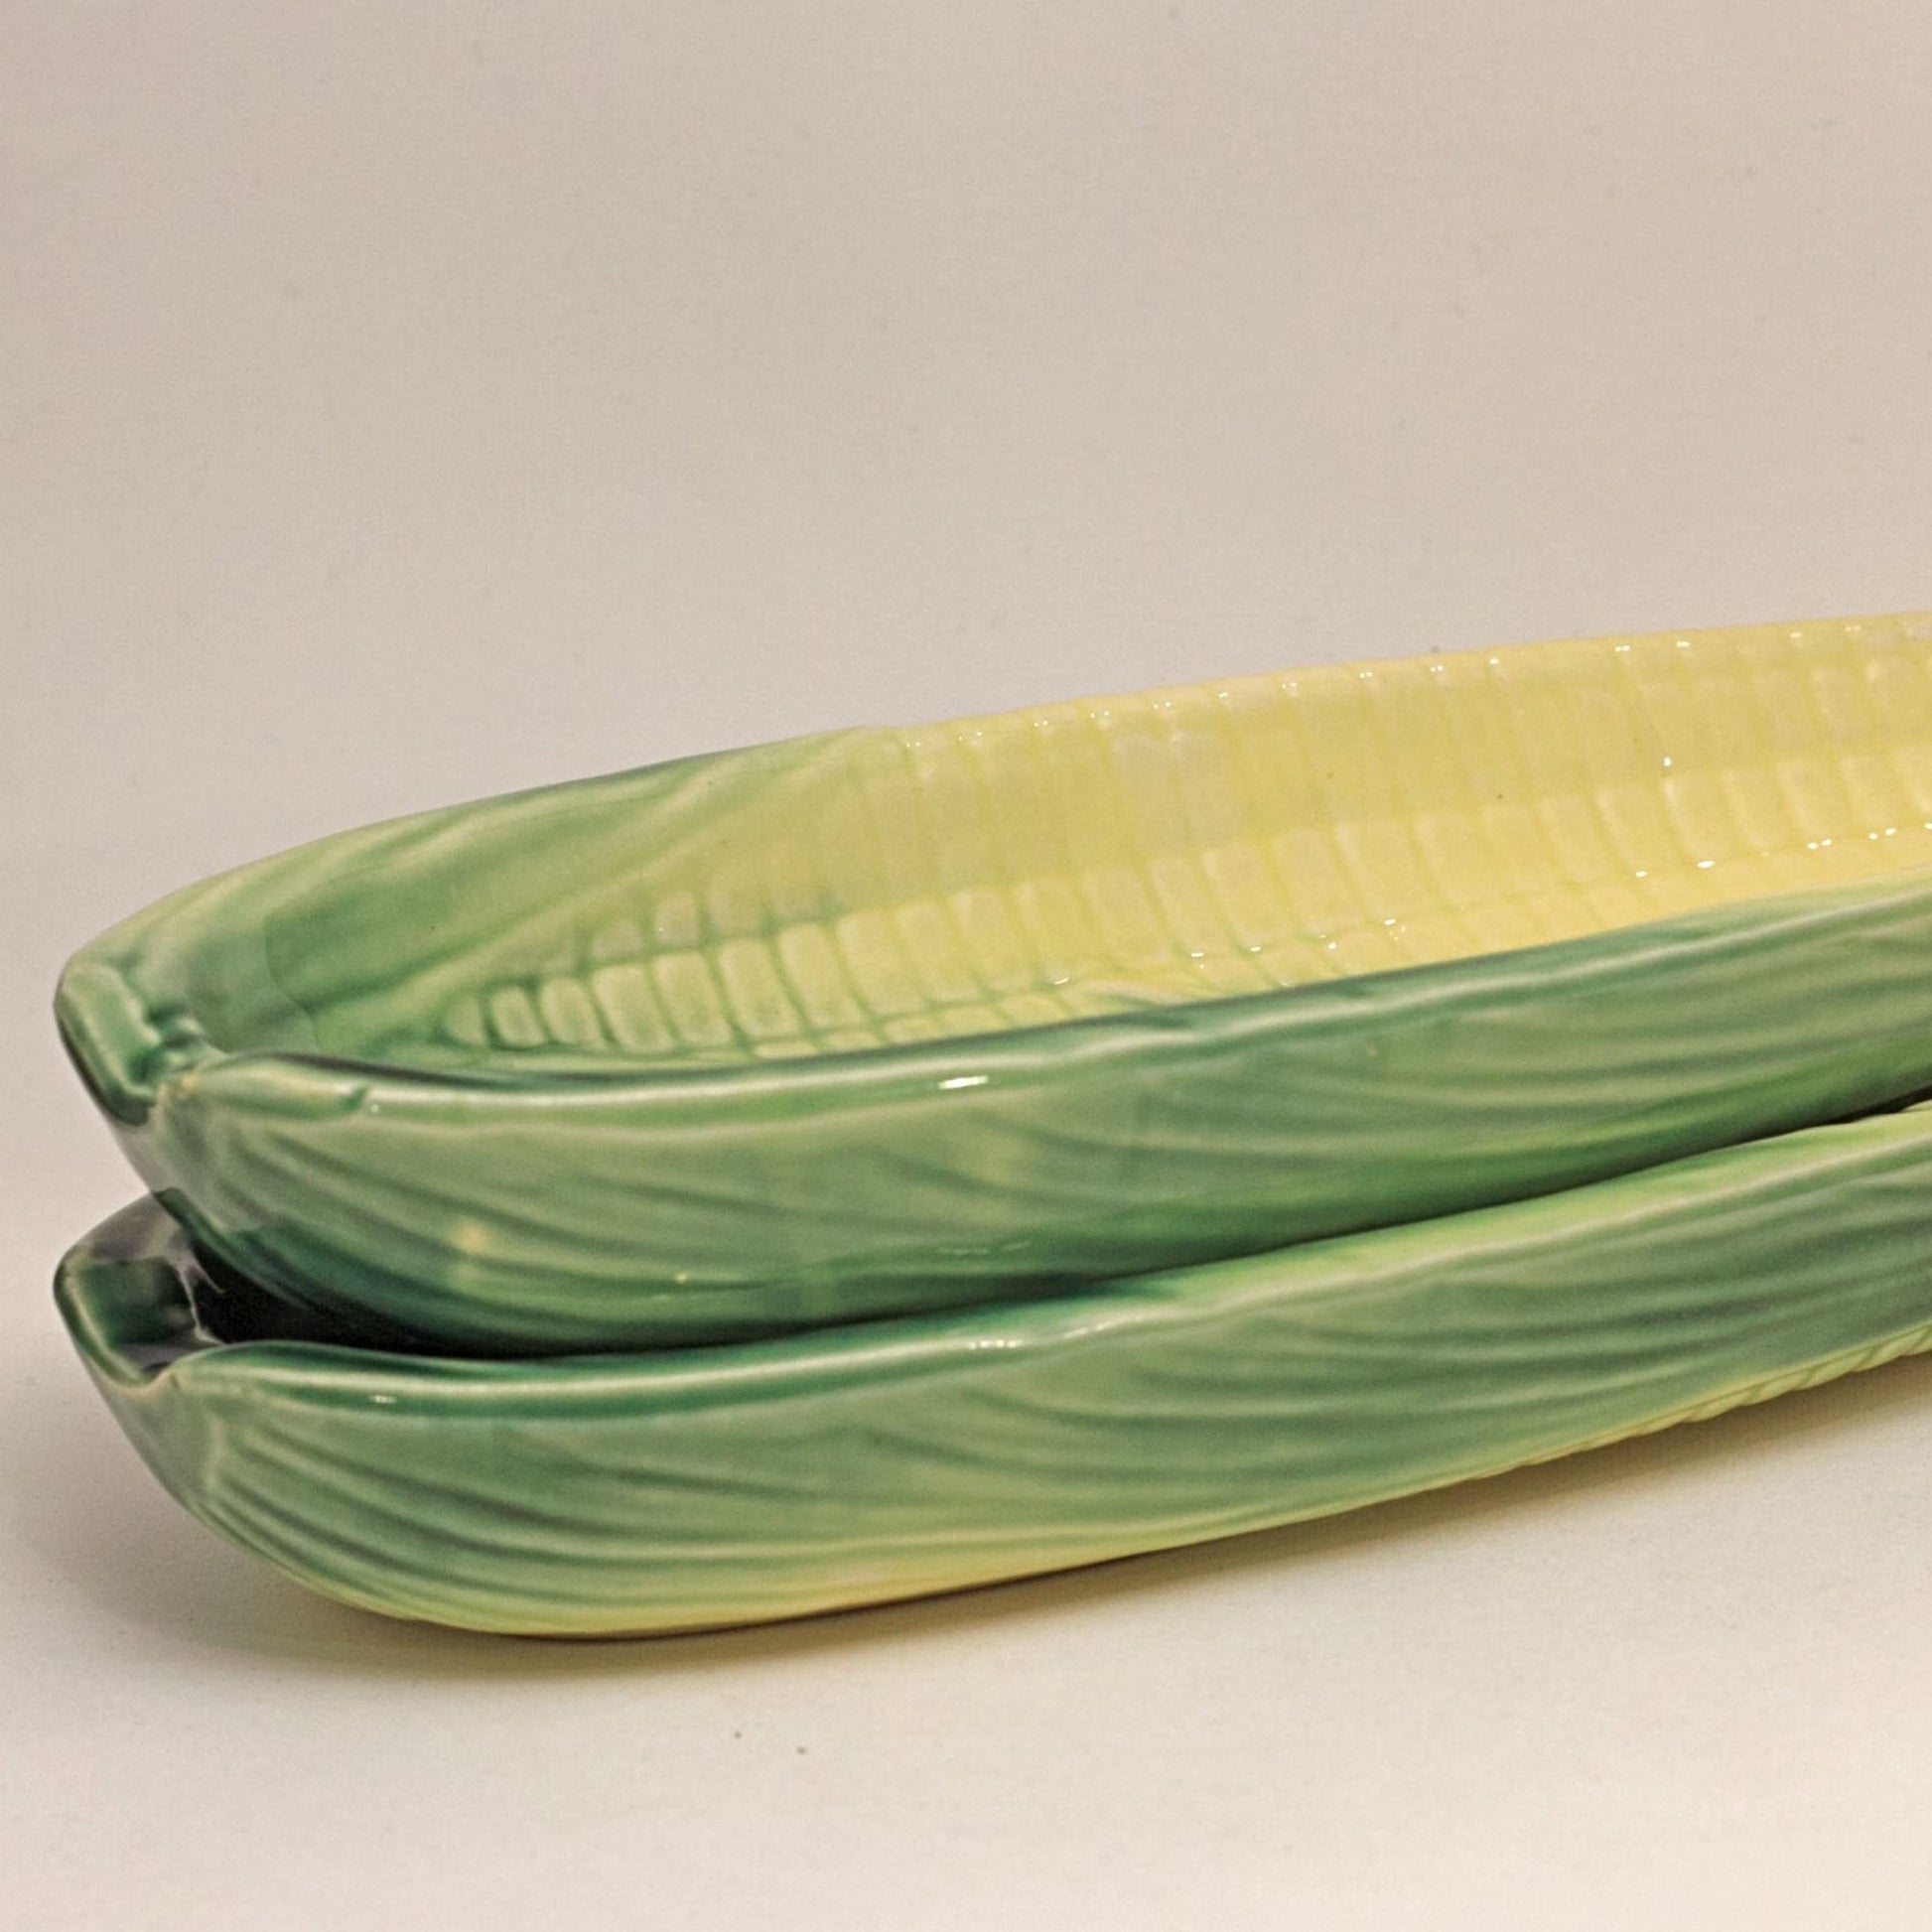 STANFORD POTTERY Corn-on-the-Cob Dishes